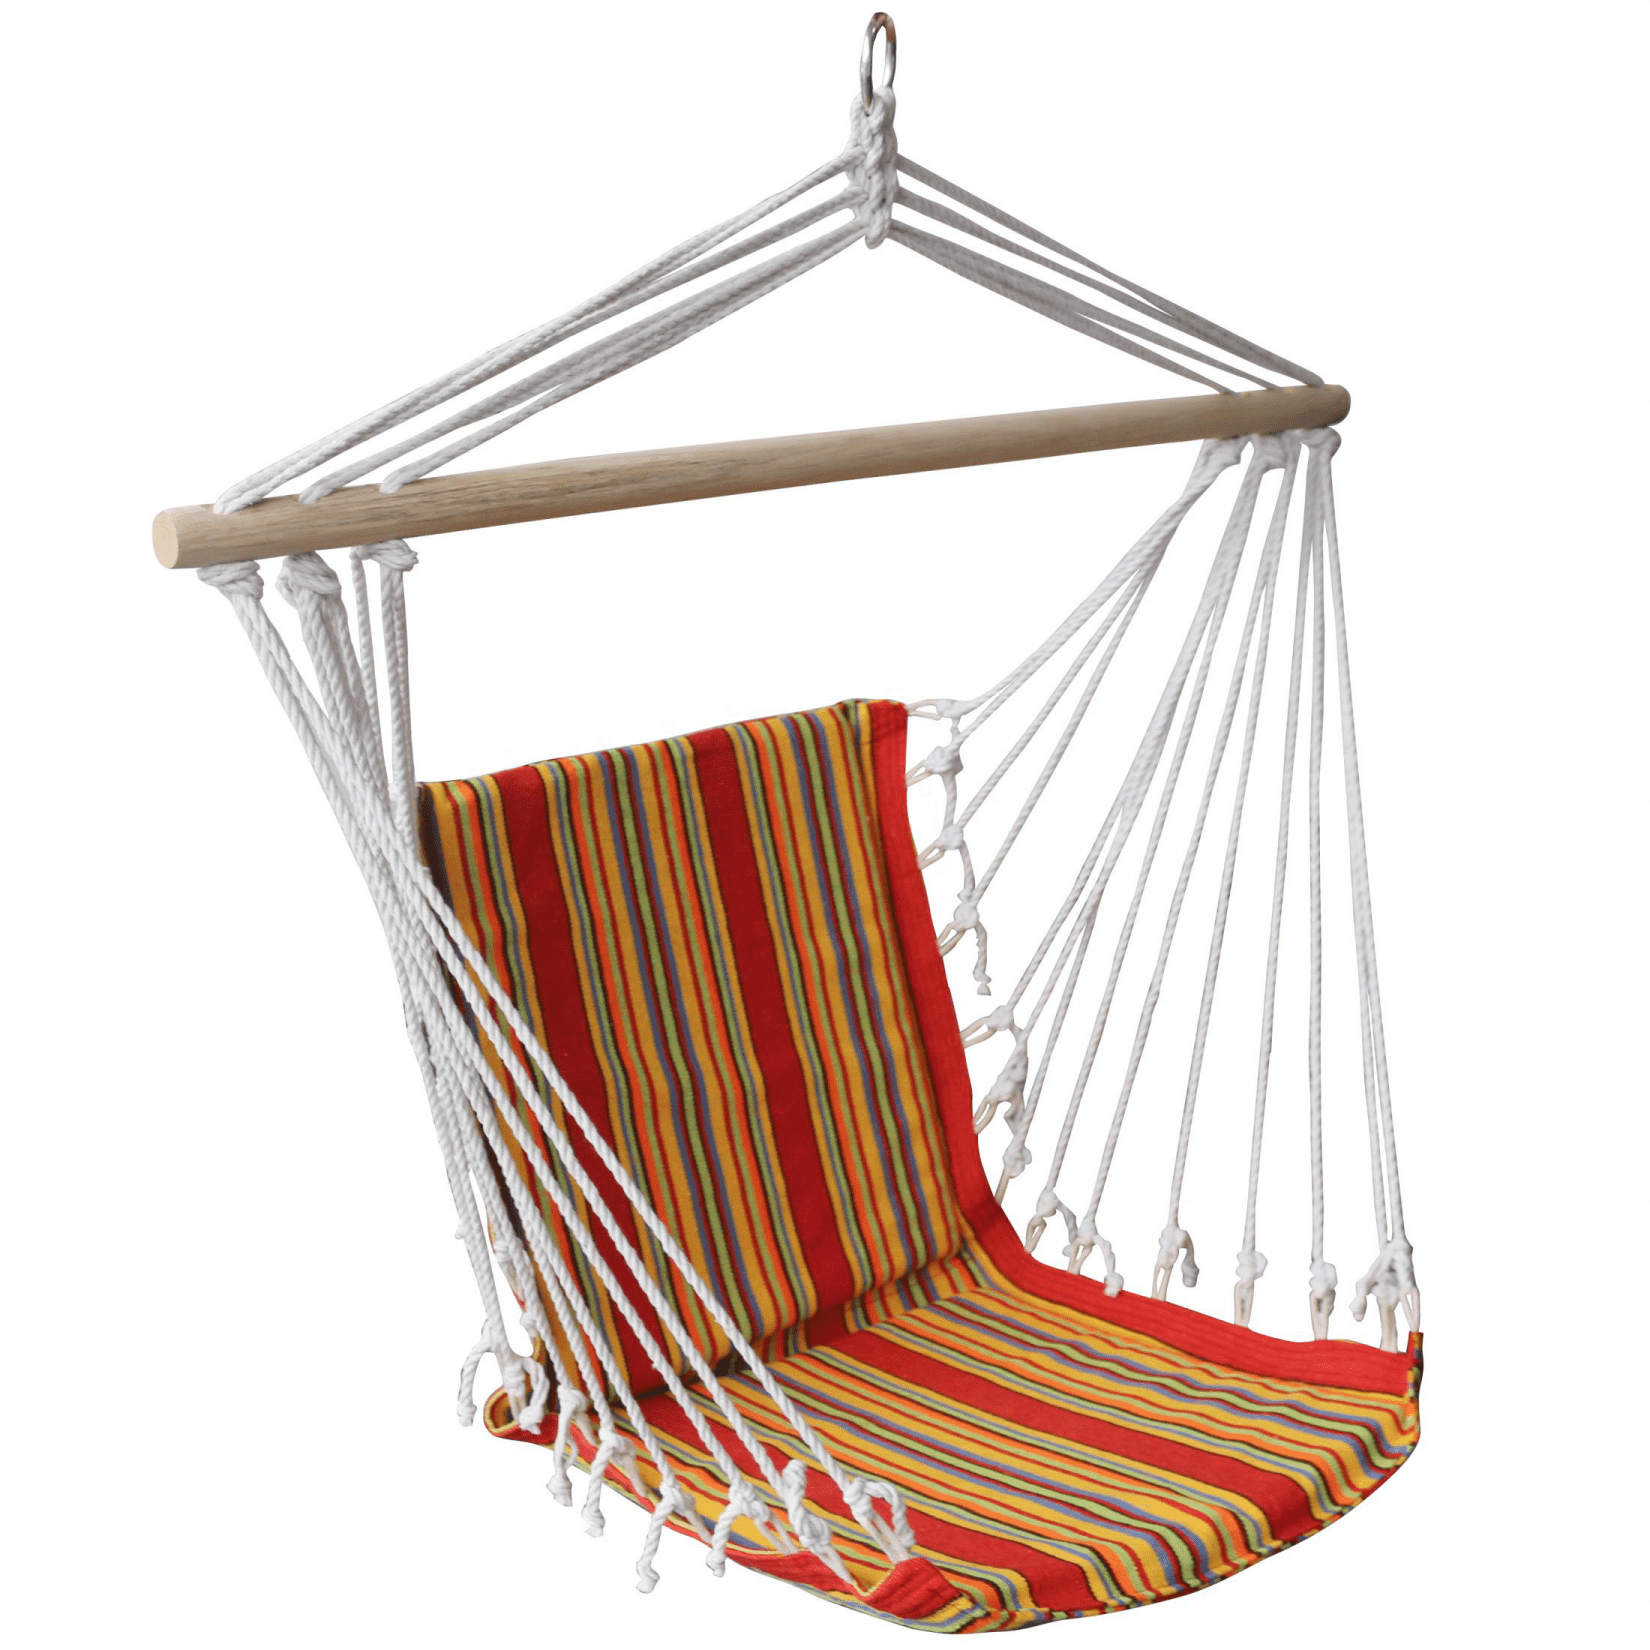 2018 China New Design Childrens Hanging Chair - Pol.ycotton hammock chair with woodbar – Top Asian